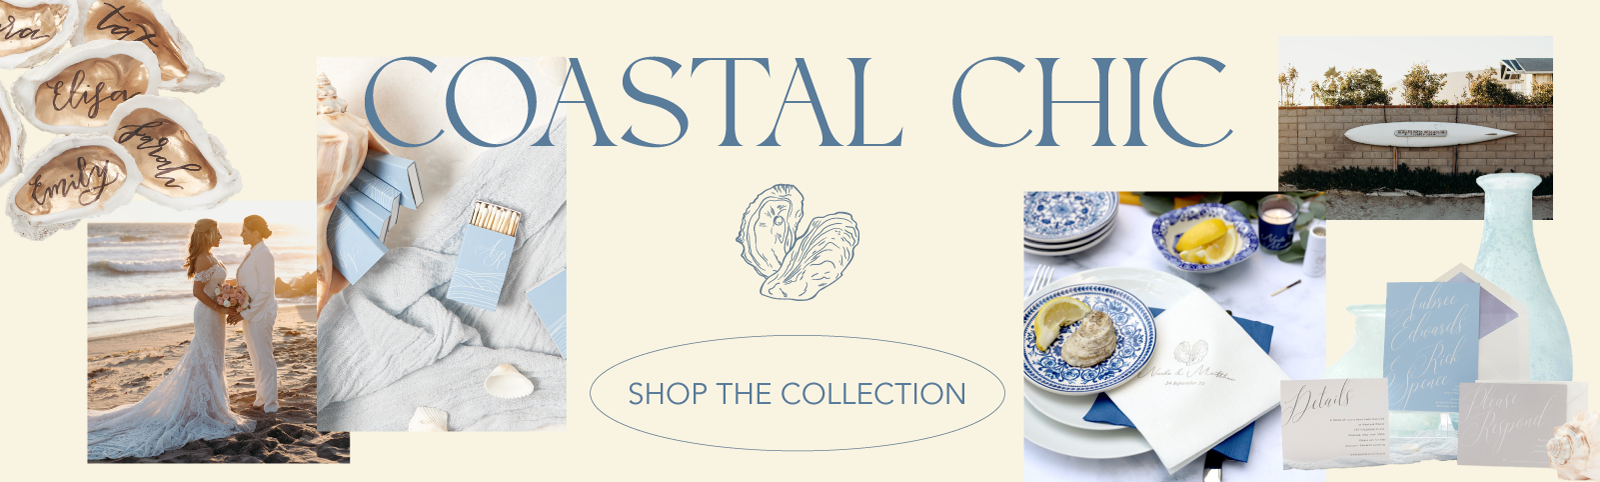 Coastal Chic:Shop The Collection